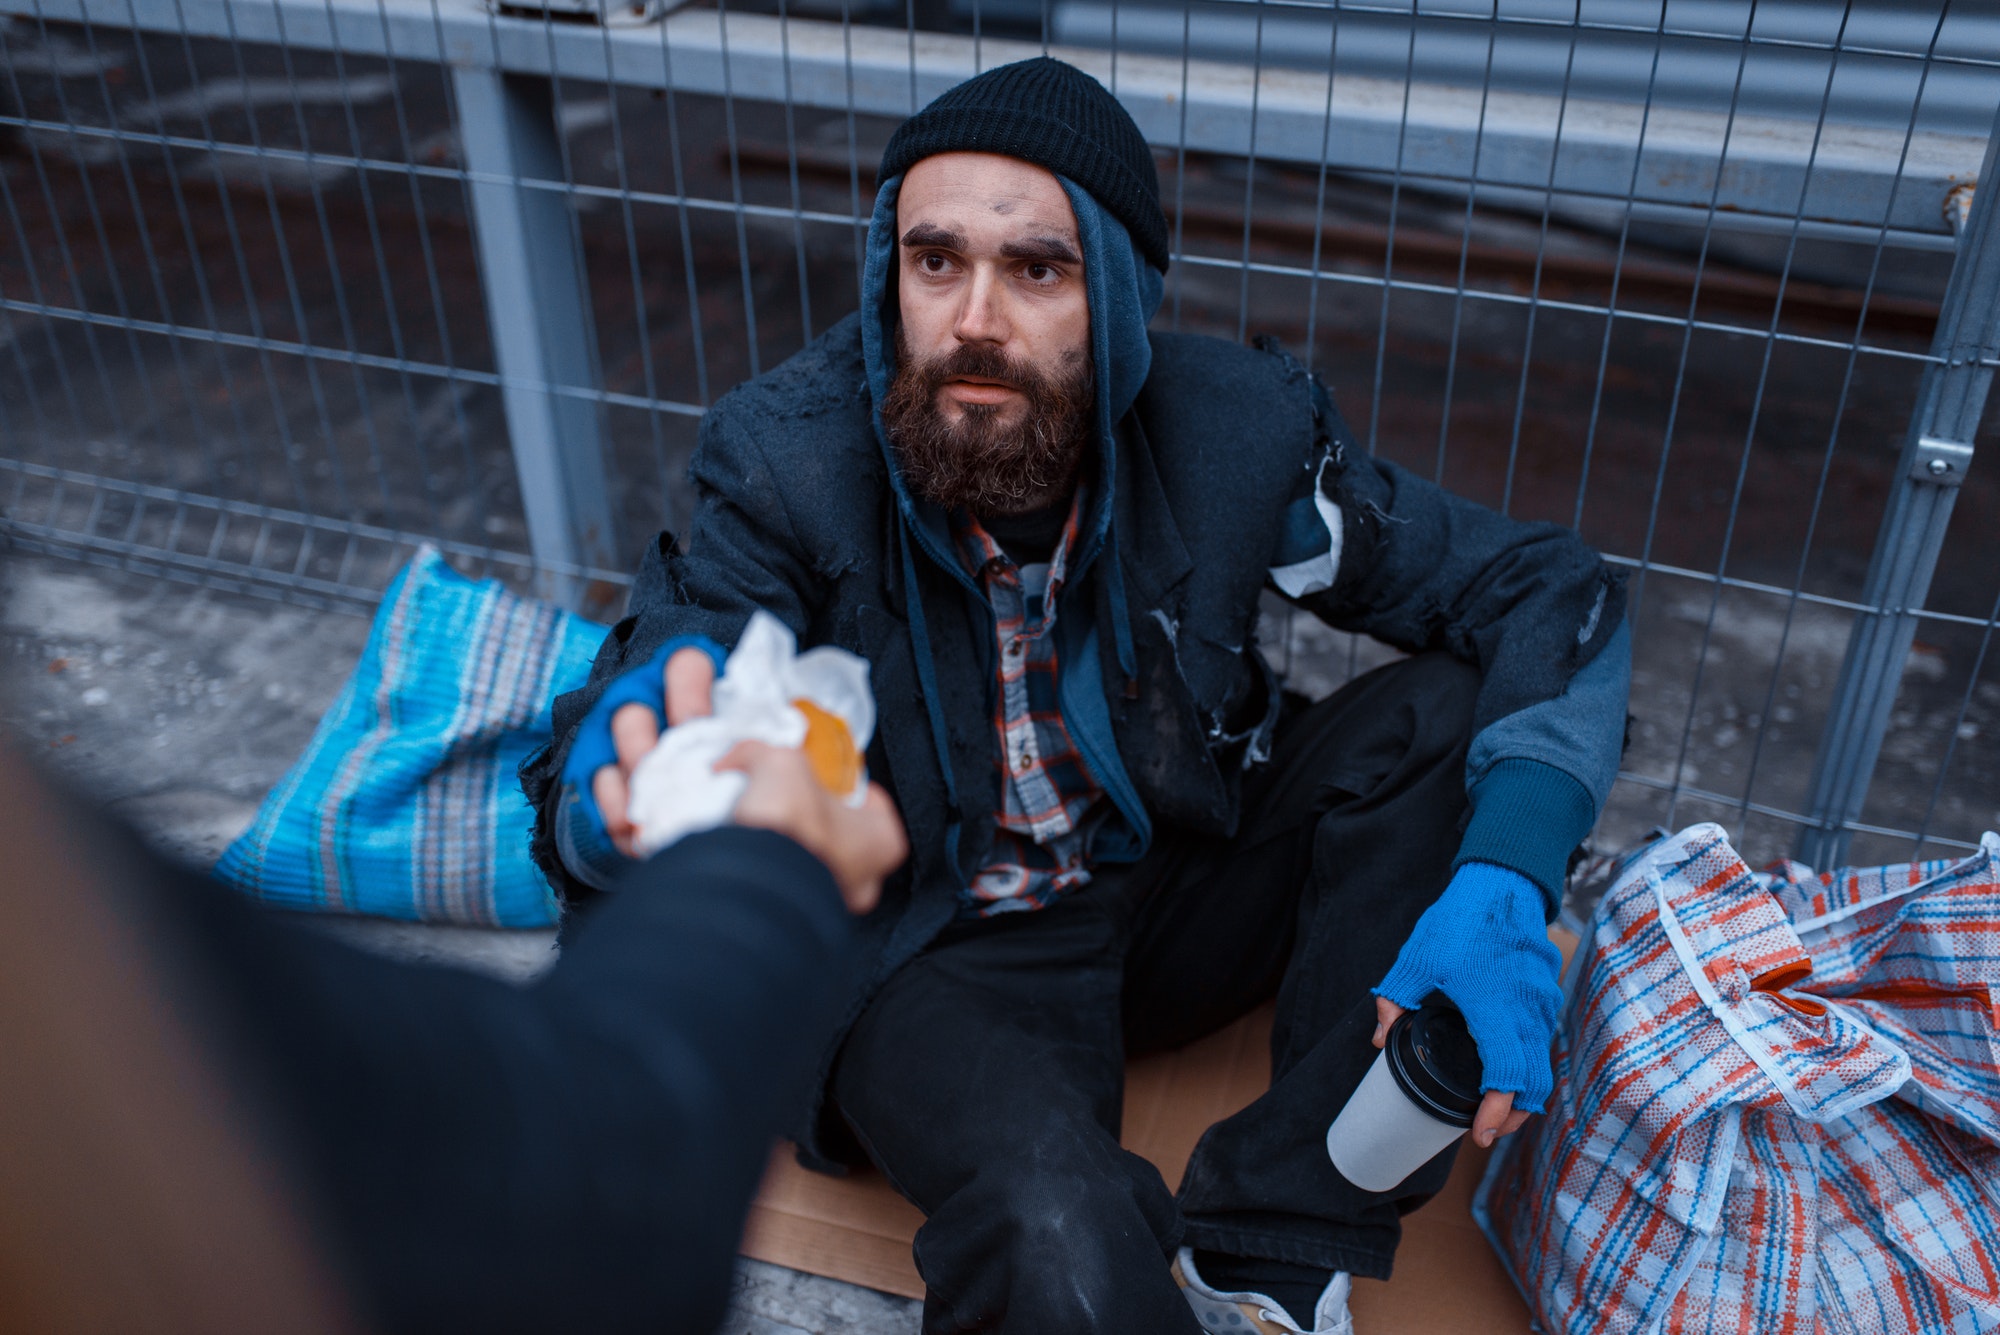 Male person gives food to bearded dirty beggar